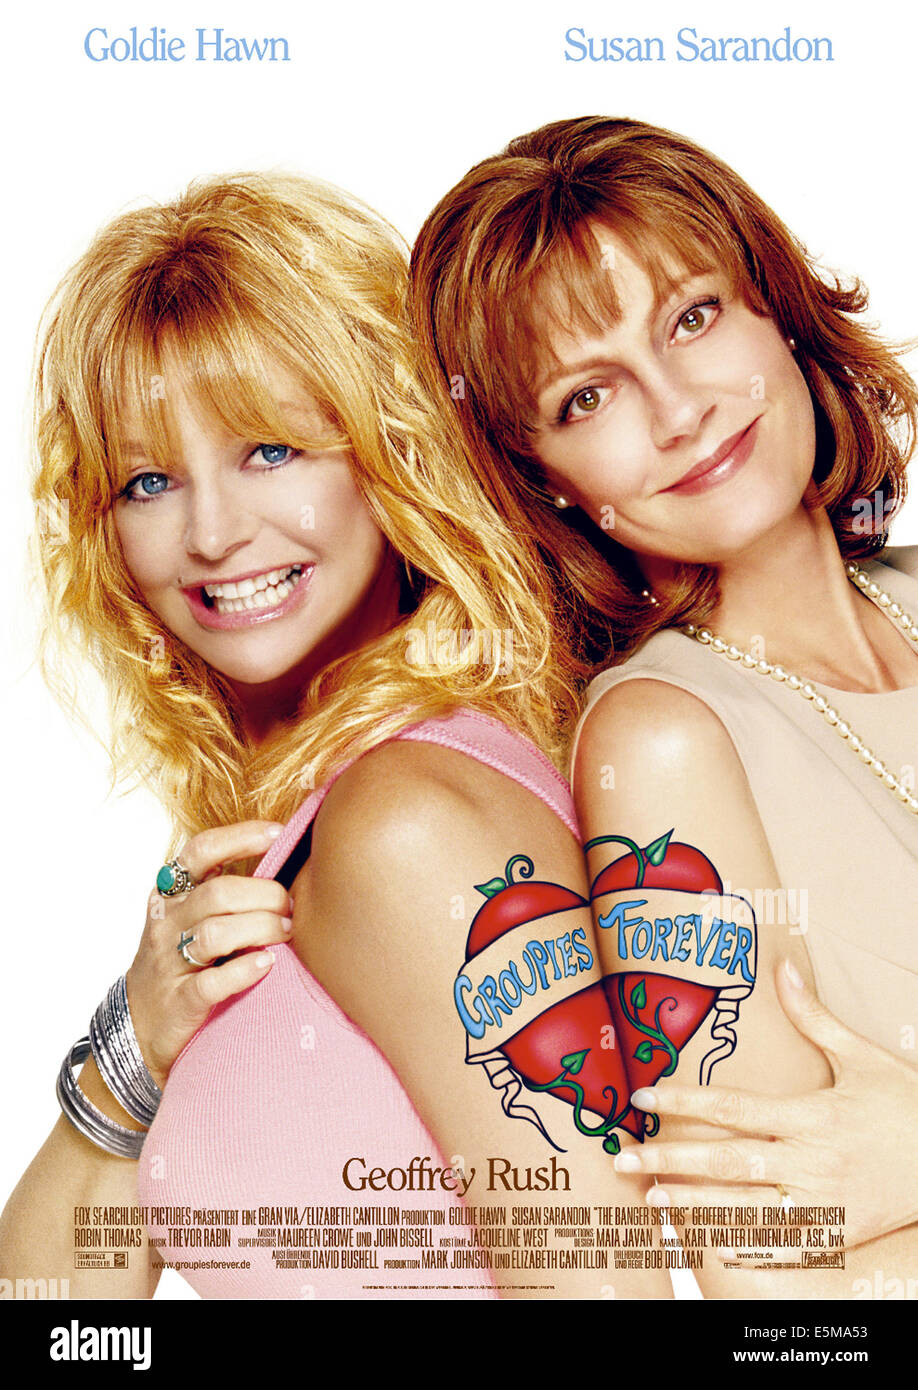 THE BANGER SISTERS, (aka GROUPIES FOREVER), Goldie Hawn, Susan Sarandon, 2002, (c) Fox Searchlight/courtesy Everett Collection Stock Photo